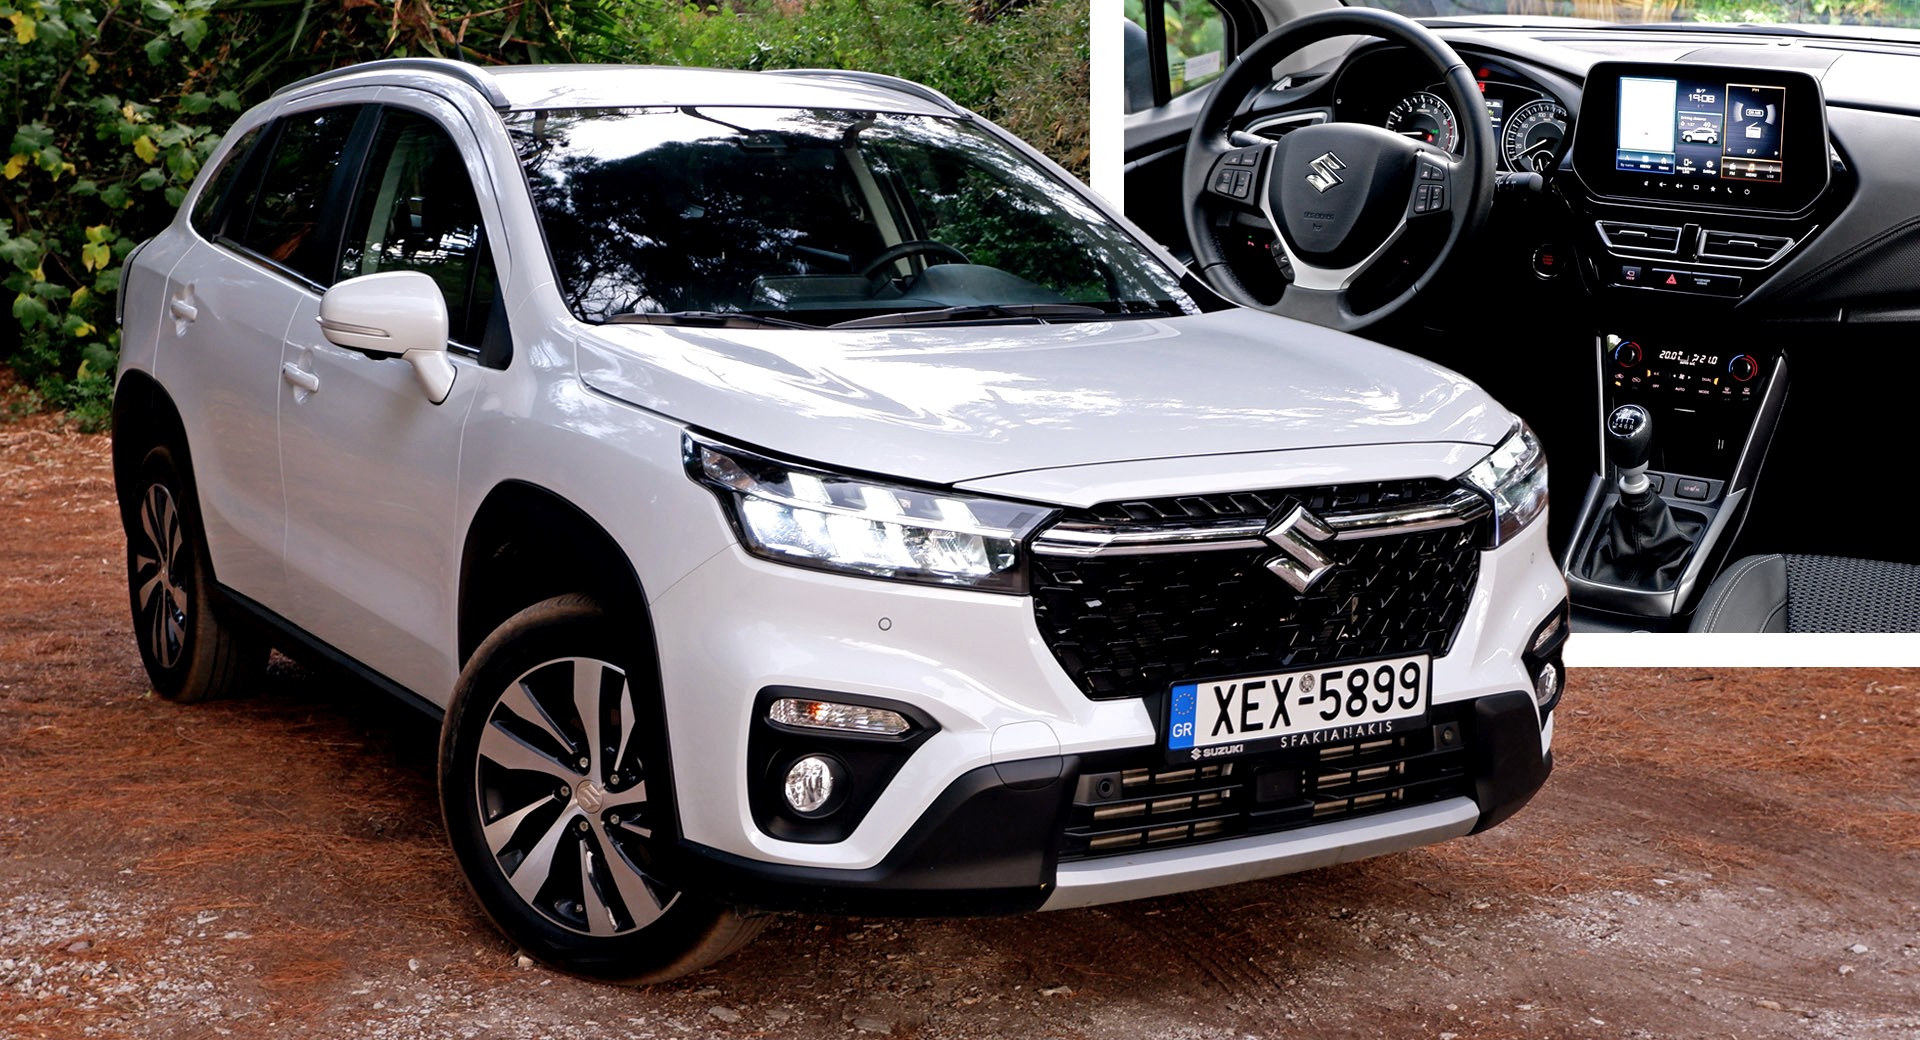 We’re Driving The Suzuki SX4 S-Cross Hybrid Allgrip, What Do You Want To Know? Auto Recent